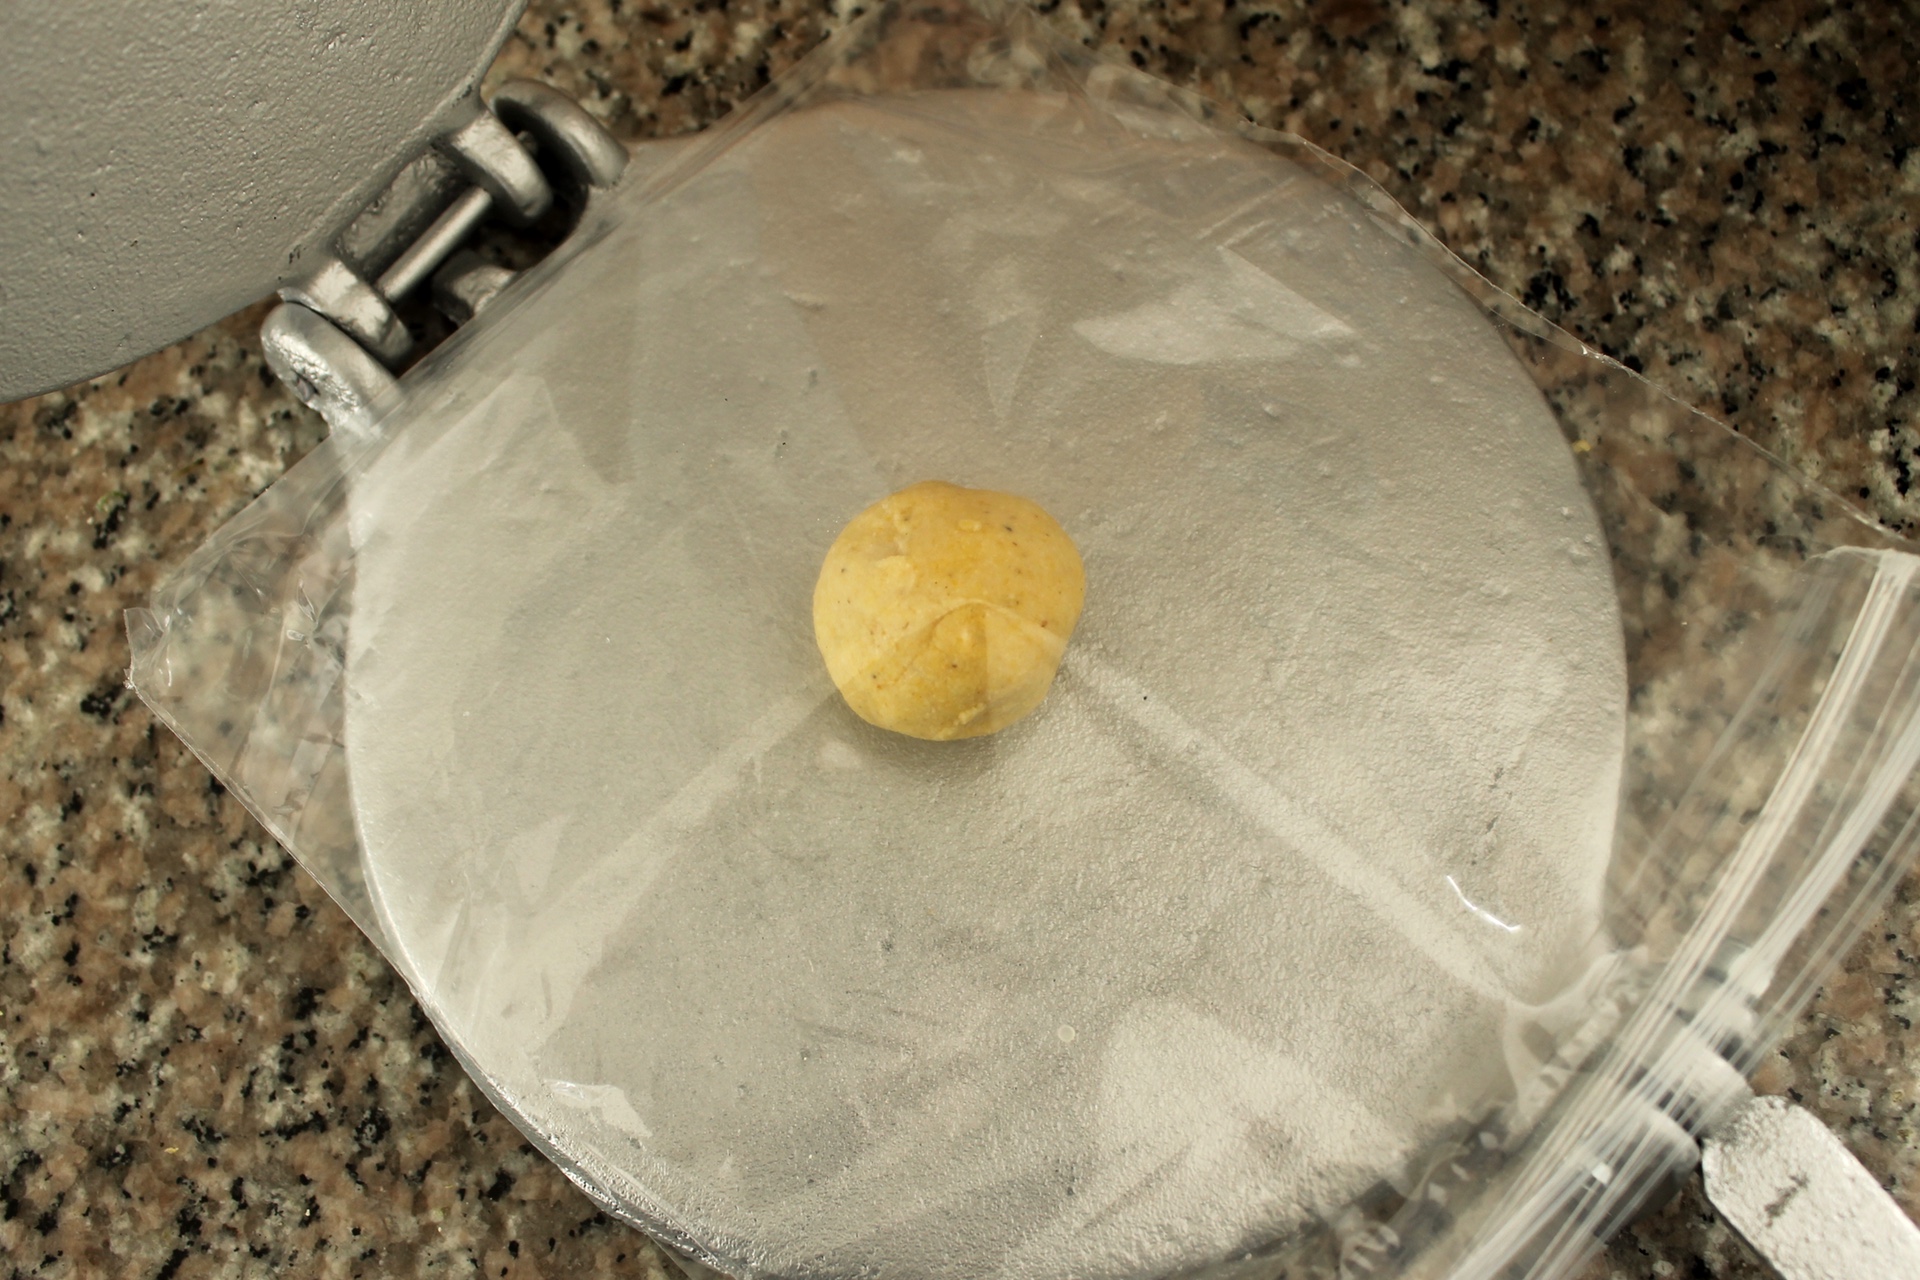 Place the ball of dough between the two layers of plastic in the center of the tortilla press.